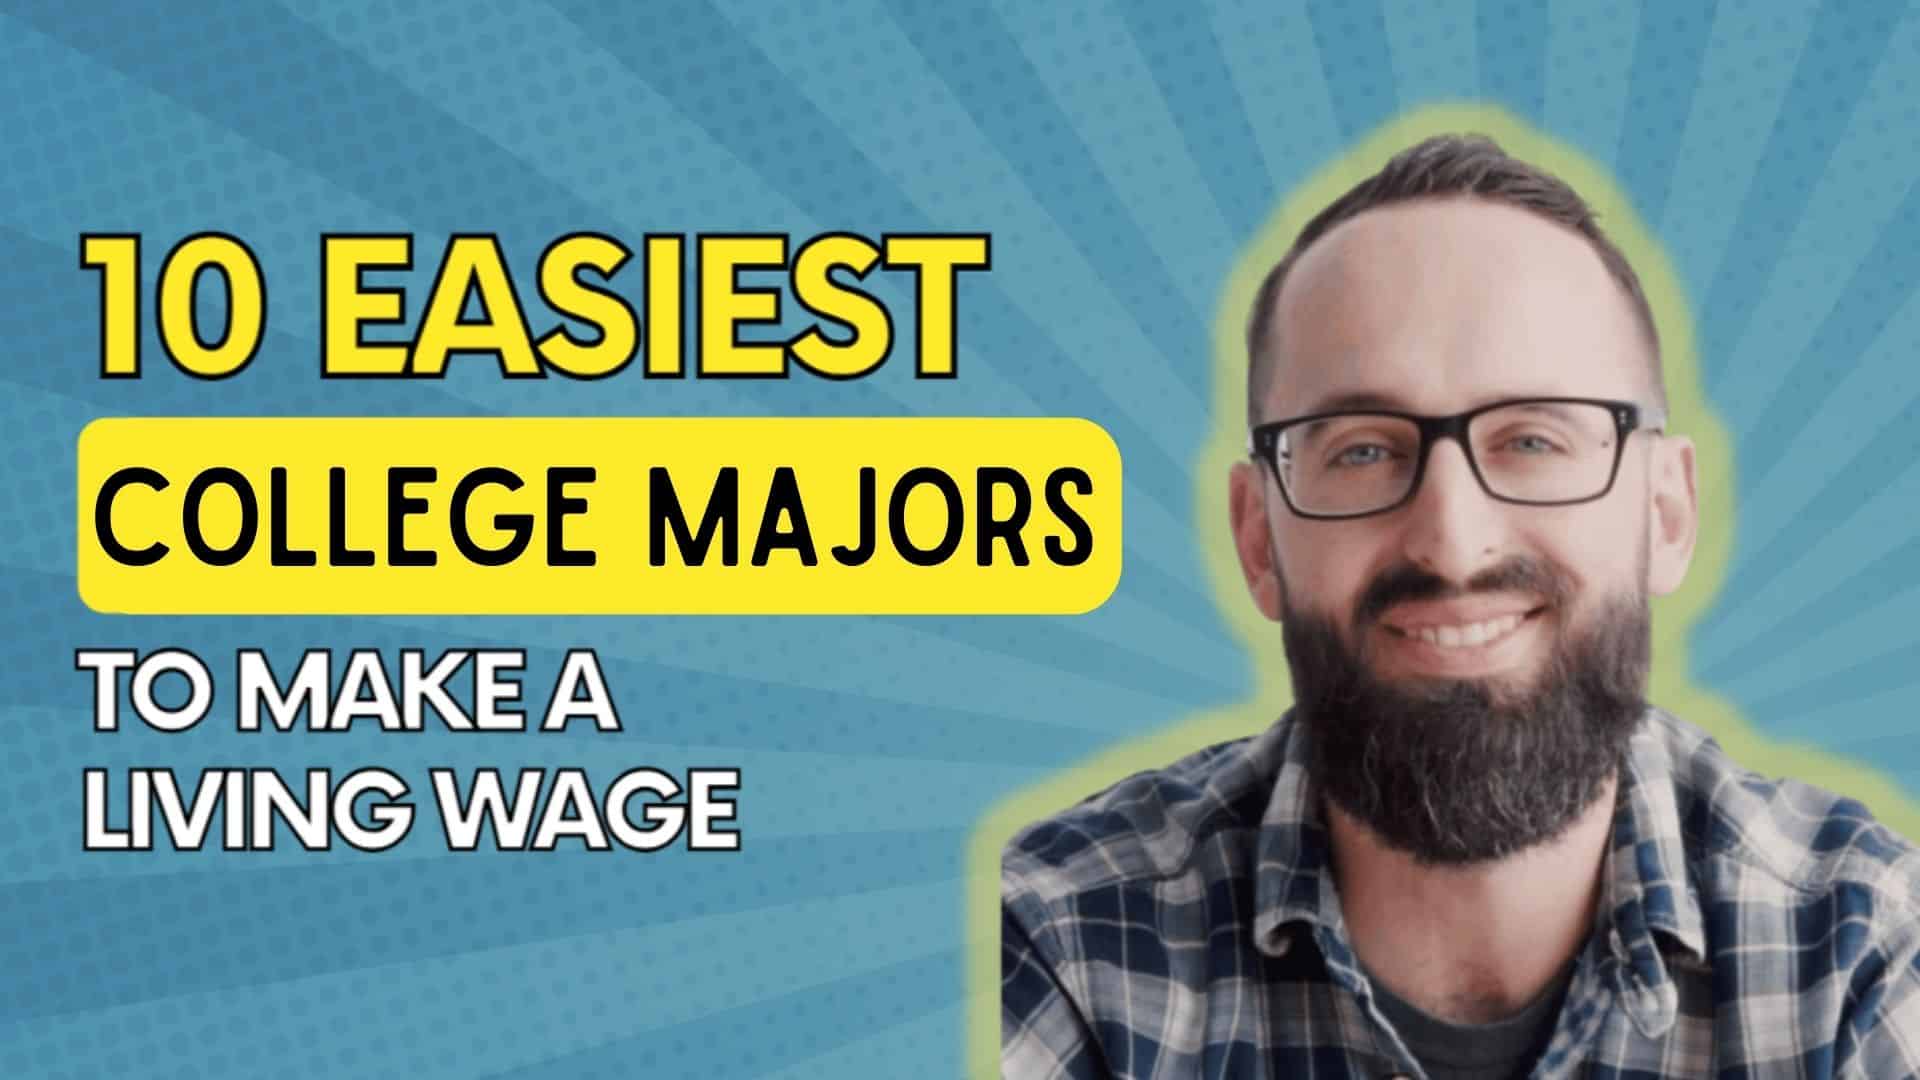 10 Easiest College Majors to make a Living Wage